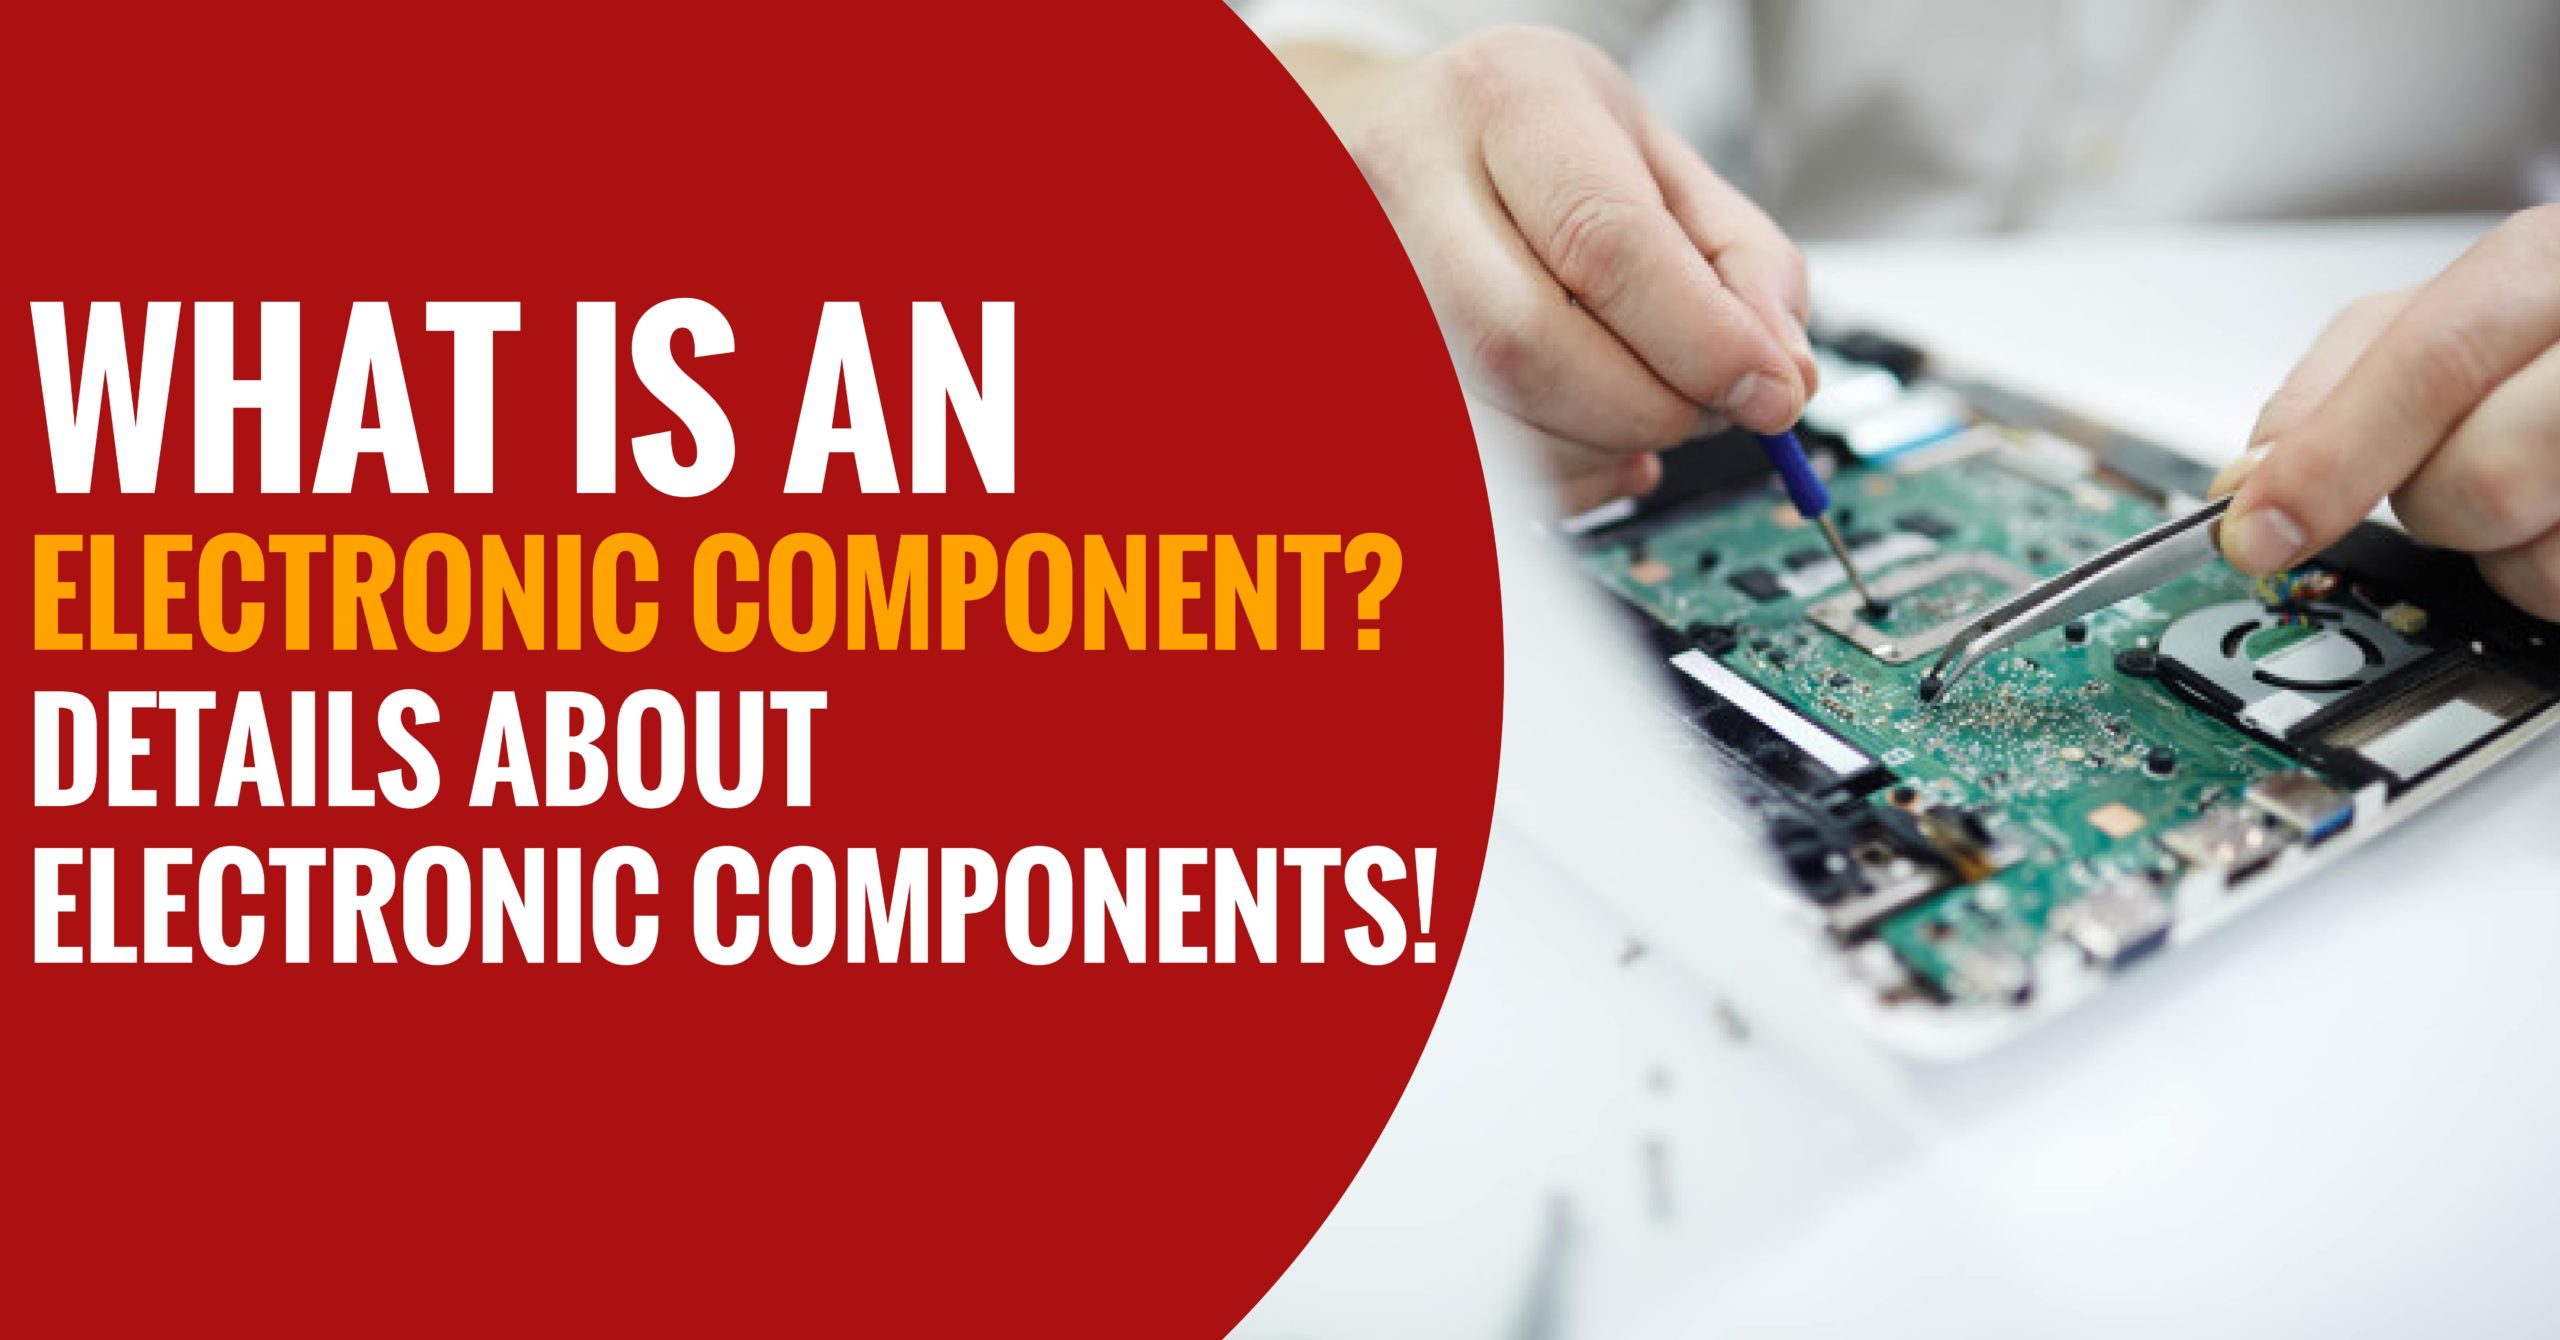 What Is an Electronic Component Details About Electronic Components